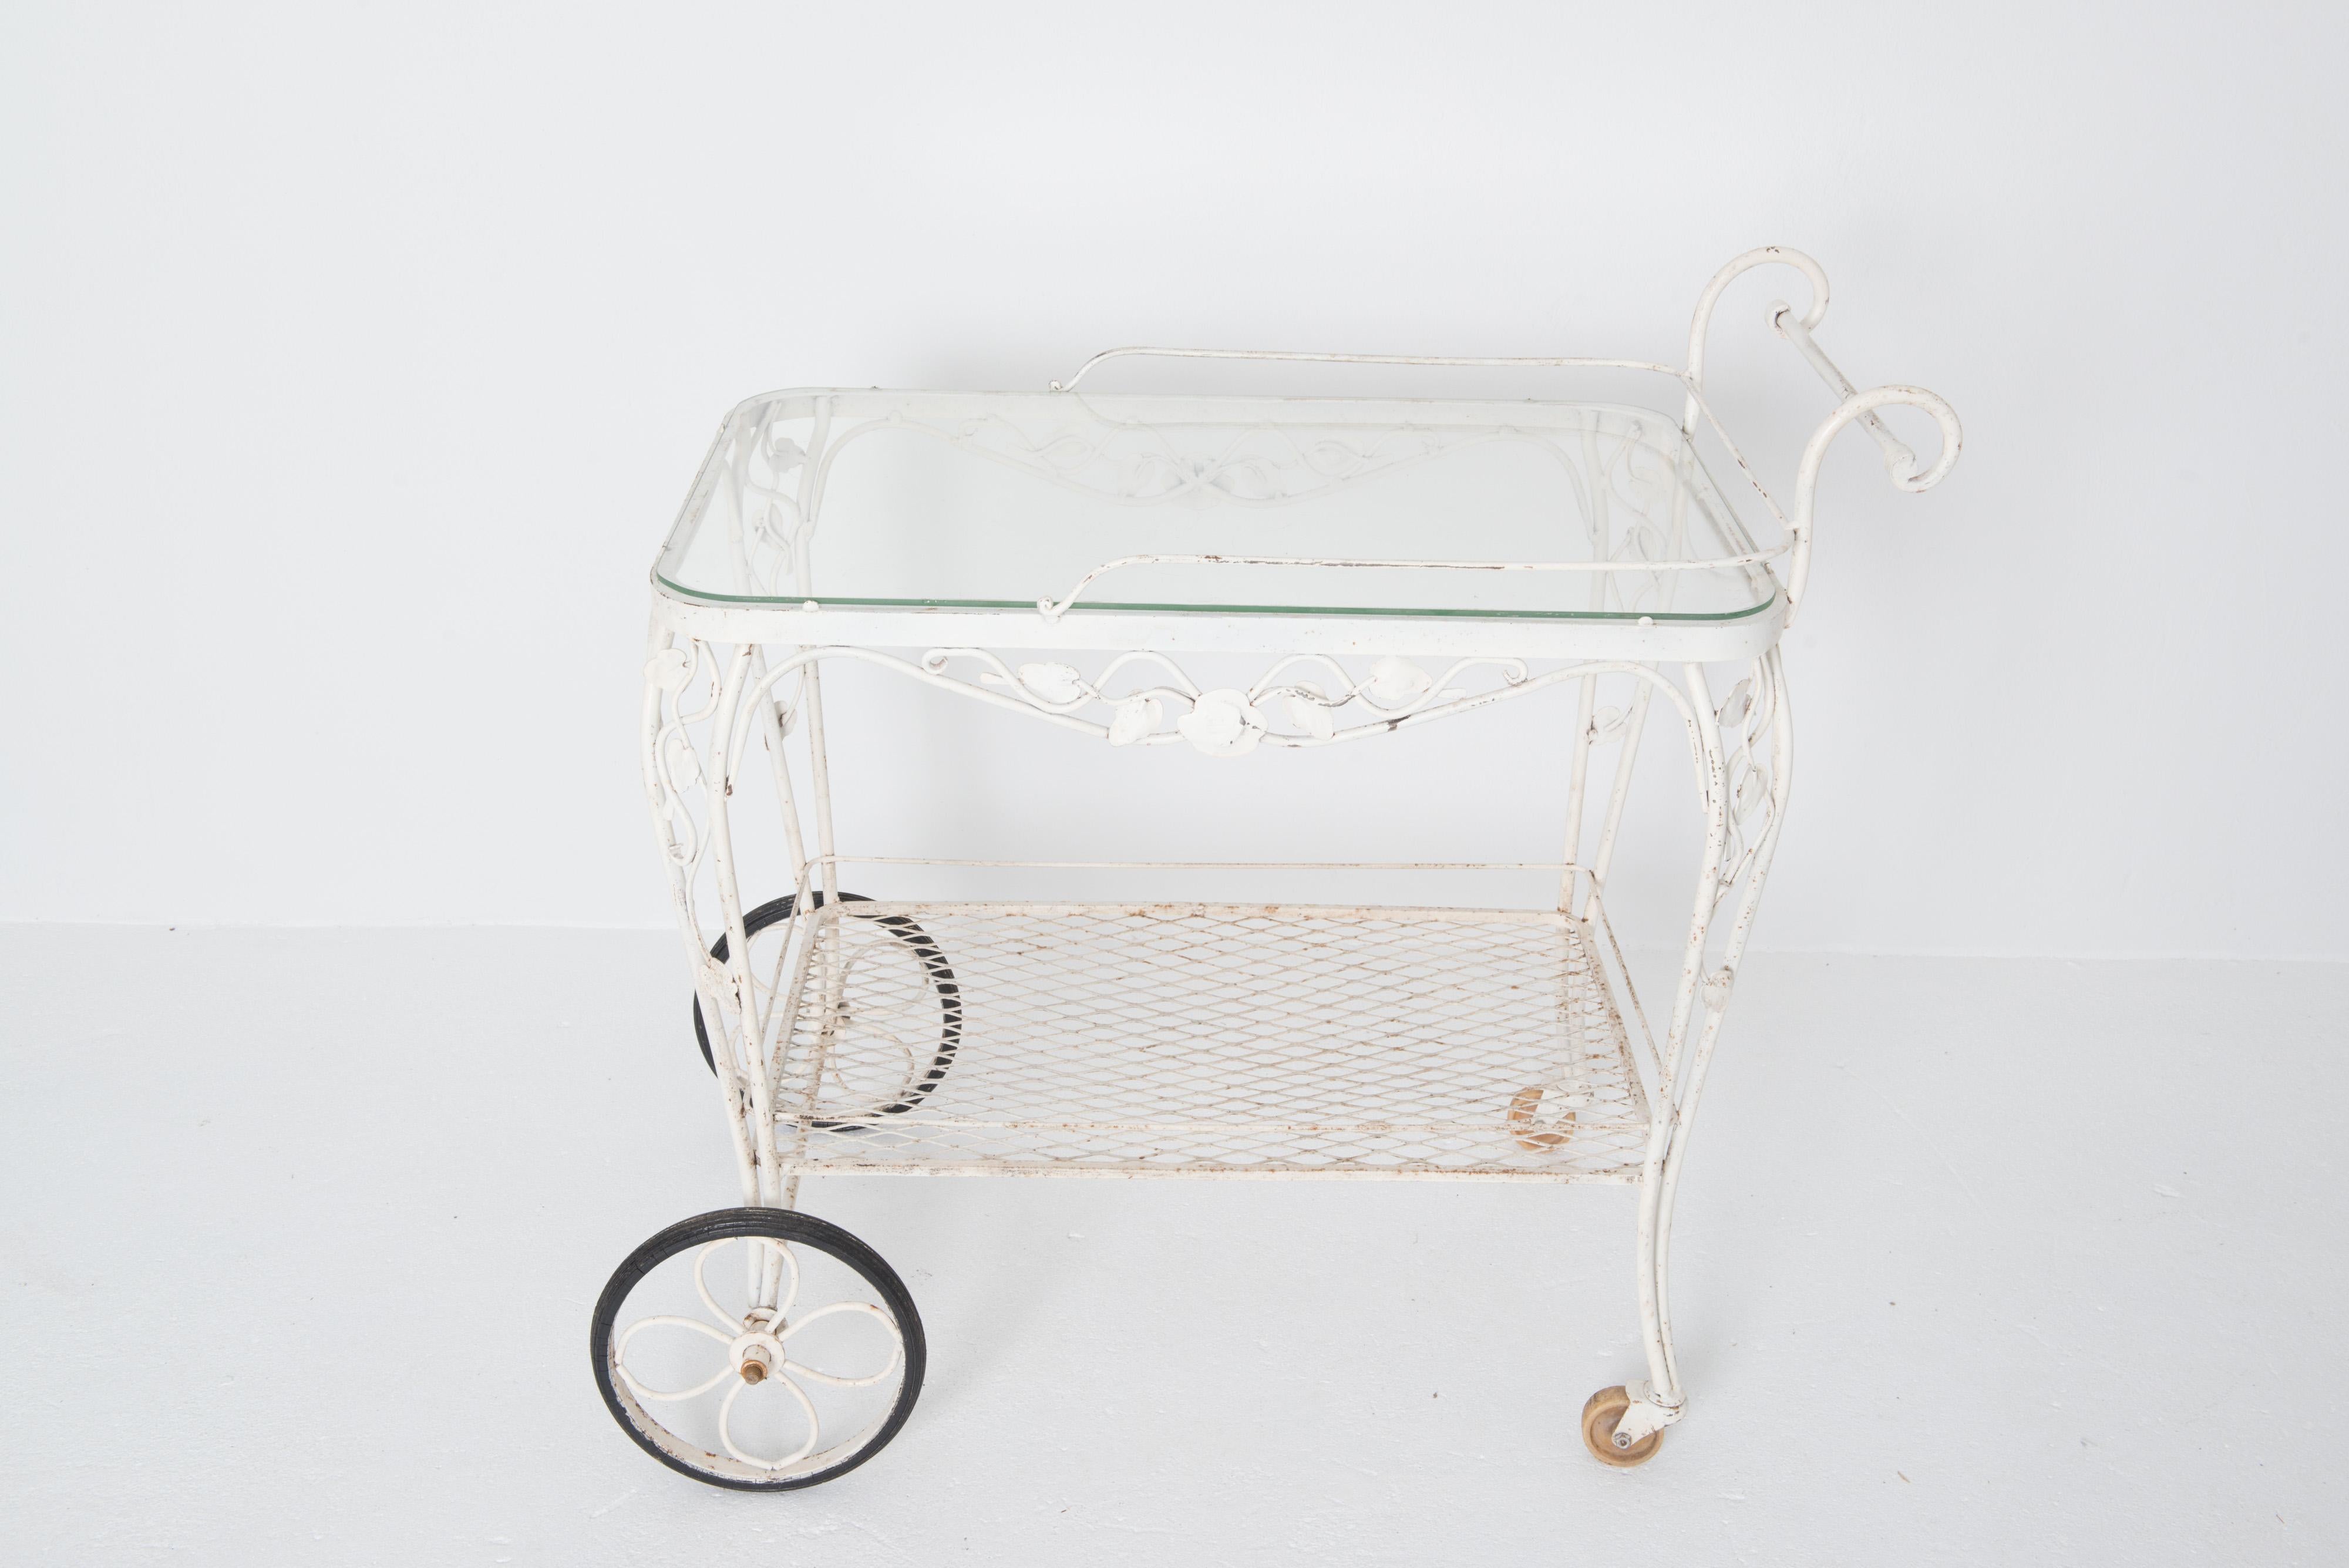 This is a Classic Woodard Chantilly Rose wrought iron tea cart or bar cart, well made and fine quality.
Wood, a great American company, furnished the patios, pools, gardens, and interiors of the most glamorous homes in America during the mid 20th